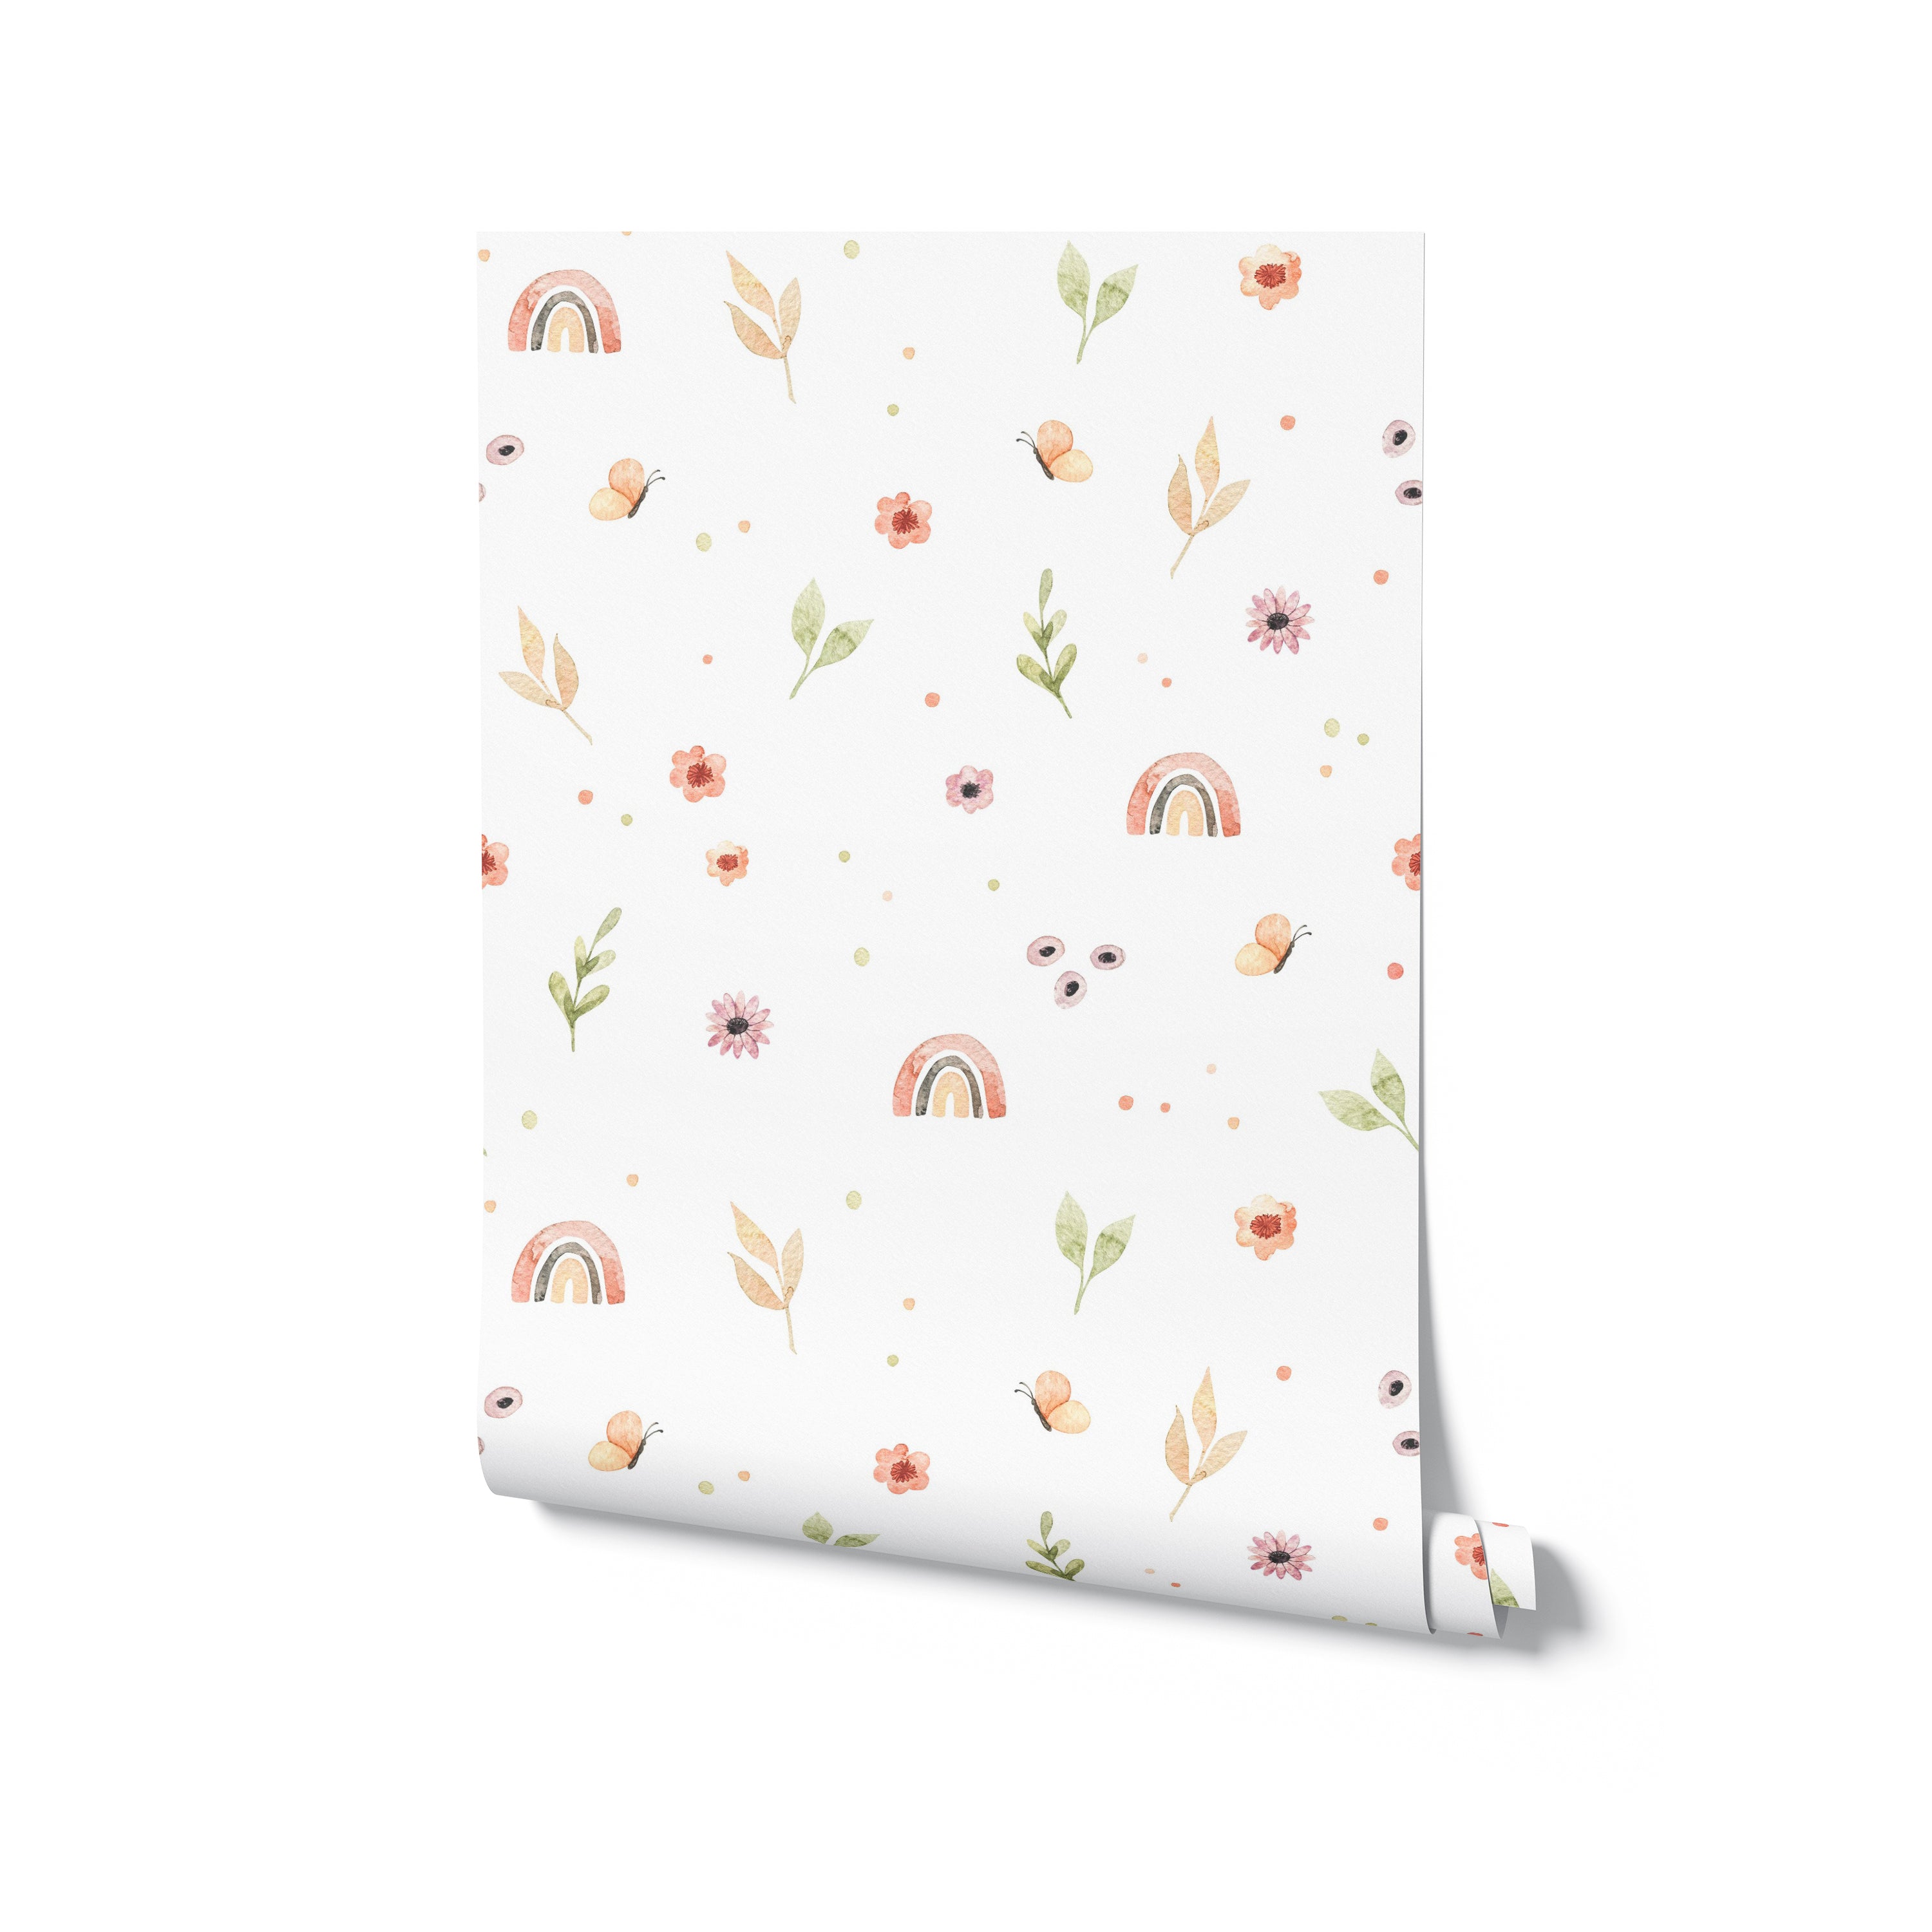 Roll of Rainbows and Flowers Wallpaper unfurled slightly to display the charming pattern of pastel rainbows, delicate flowers, and foliage in a watercolor style.